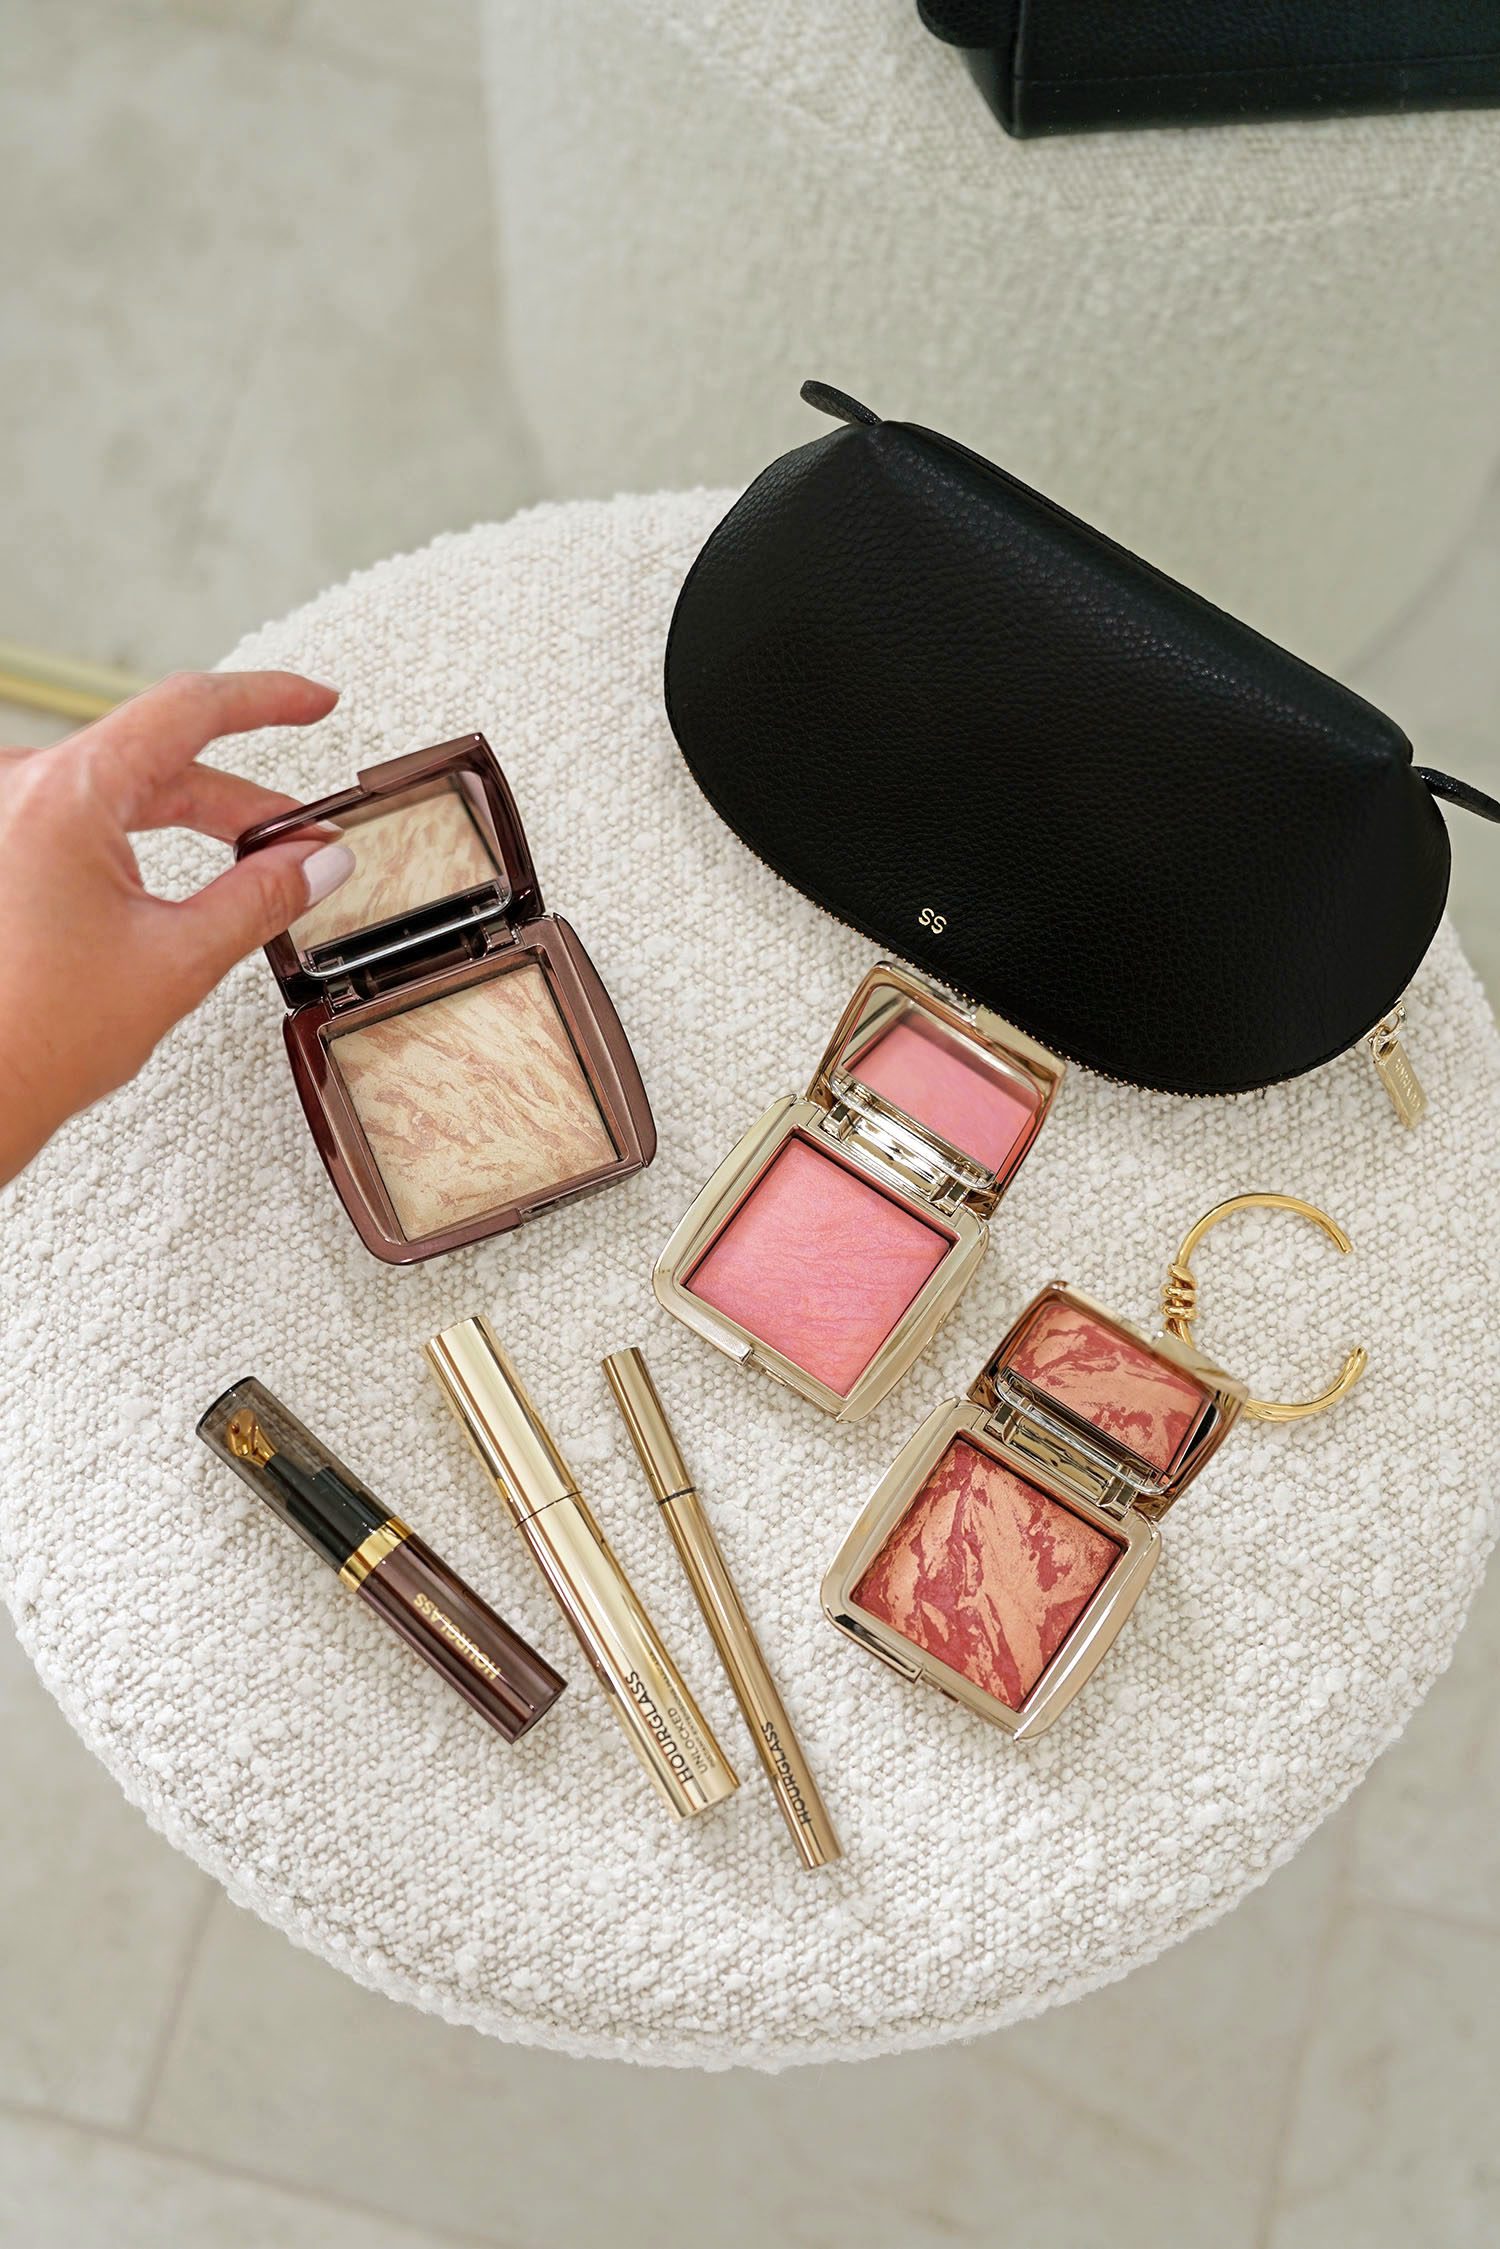 Hourglass Ambient Lighting Blushes: At Night & Sublime Flush – The